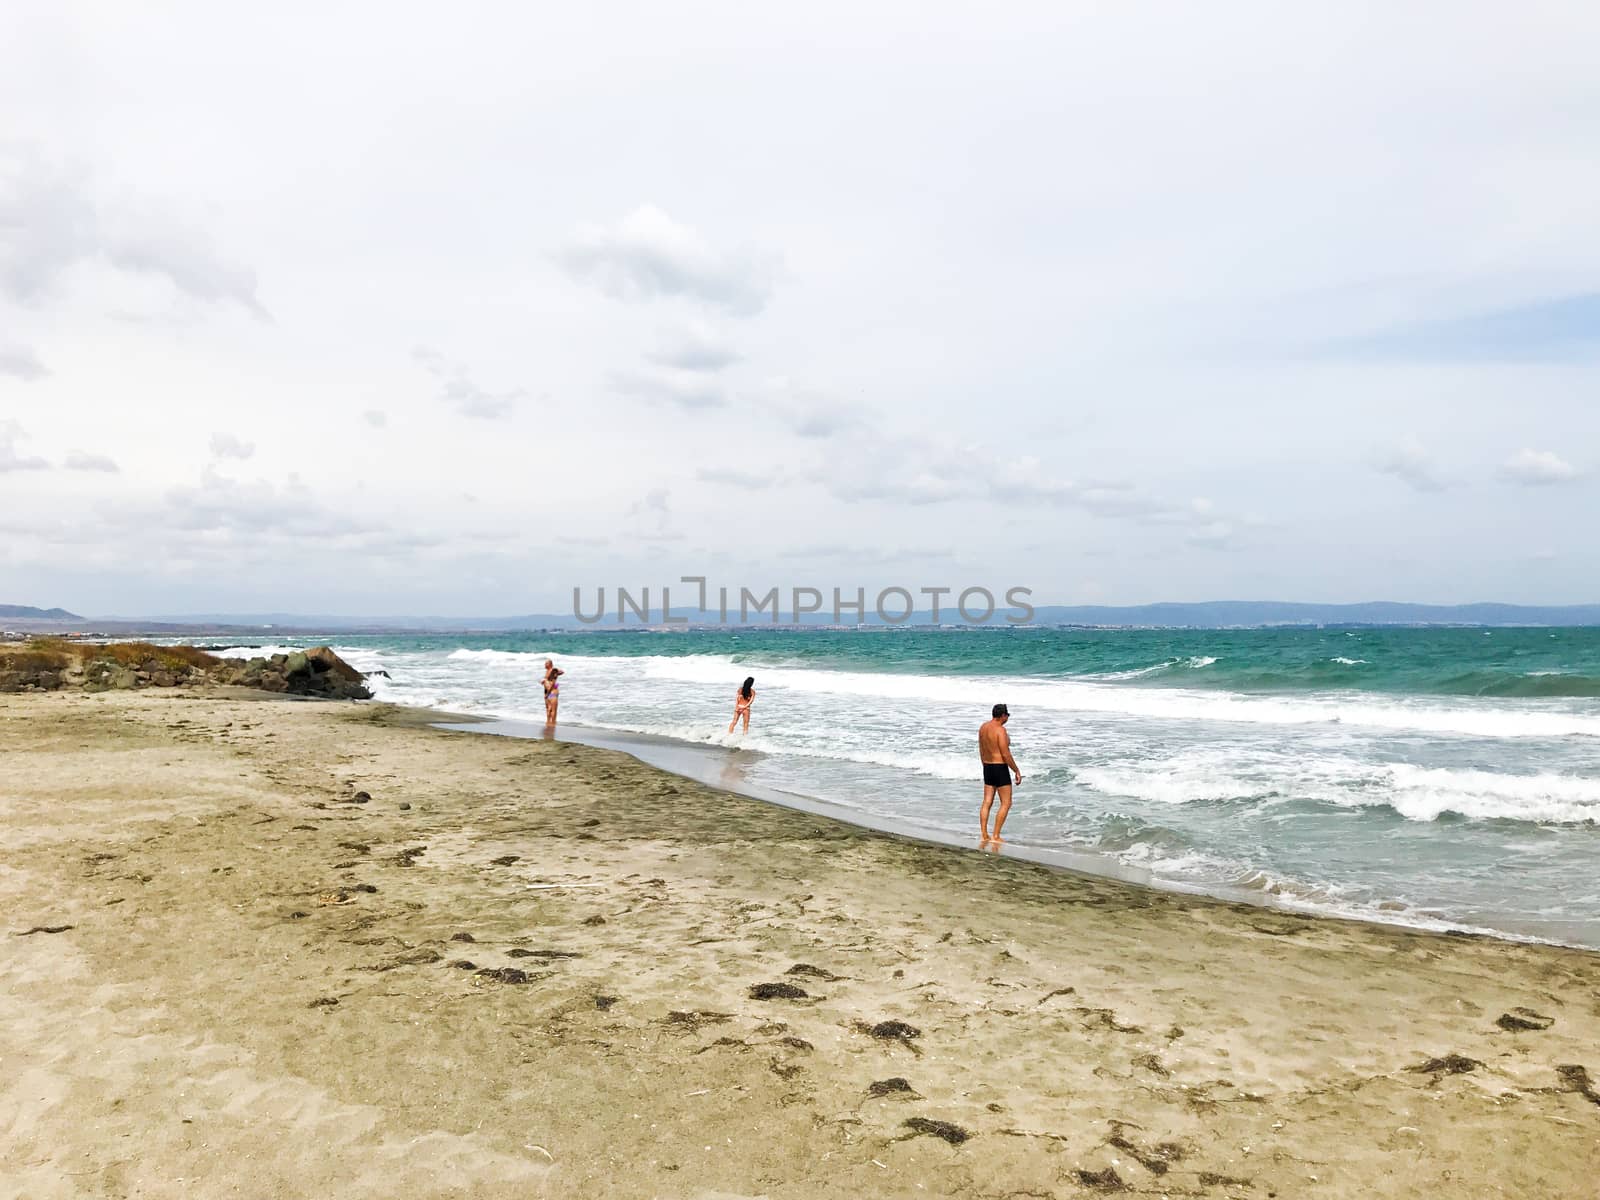 Pomorie, Bulgaria - September 12, 2019: People Relaxing On The Beach. by nenovbrothers